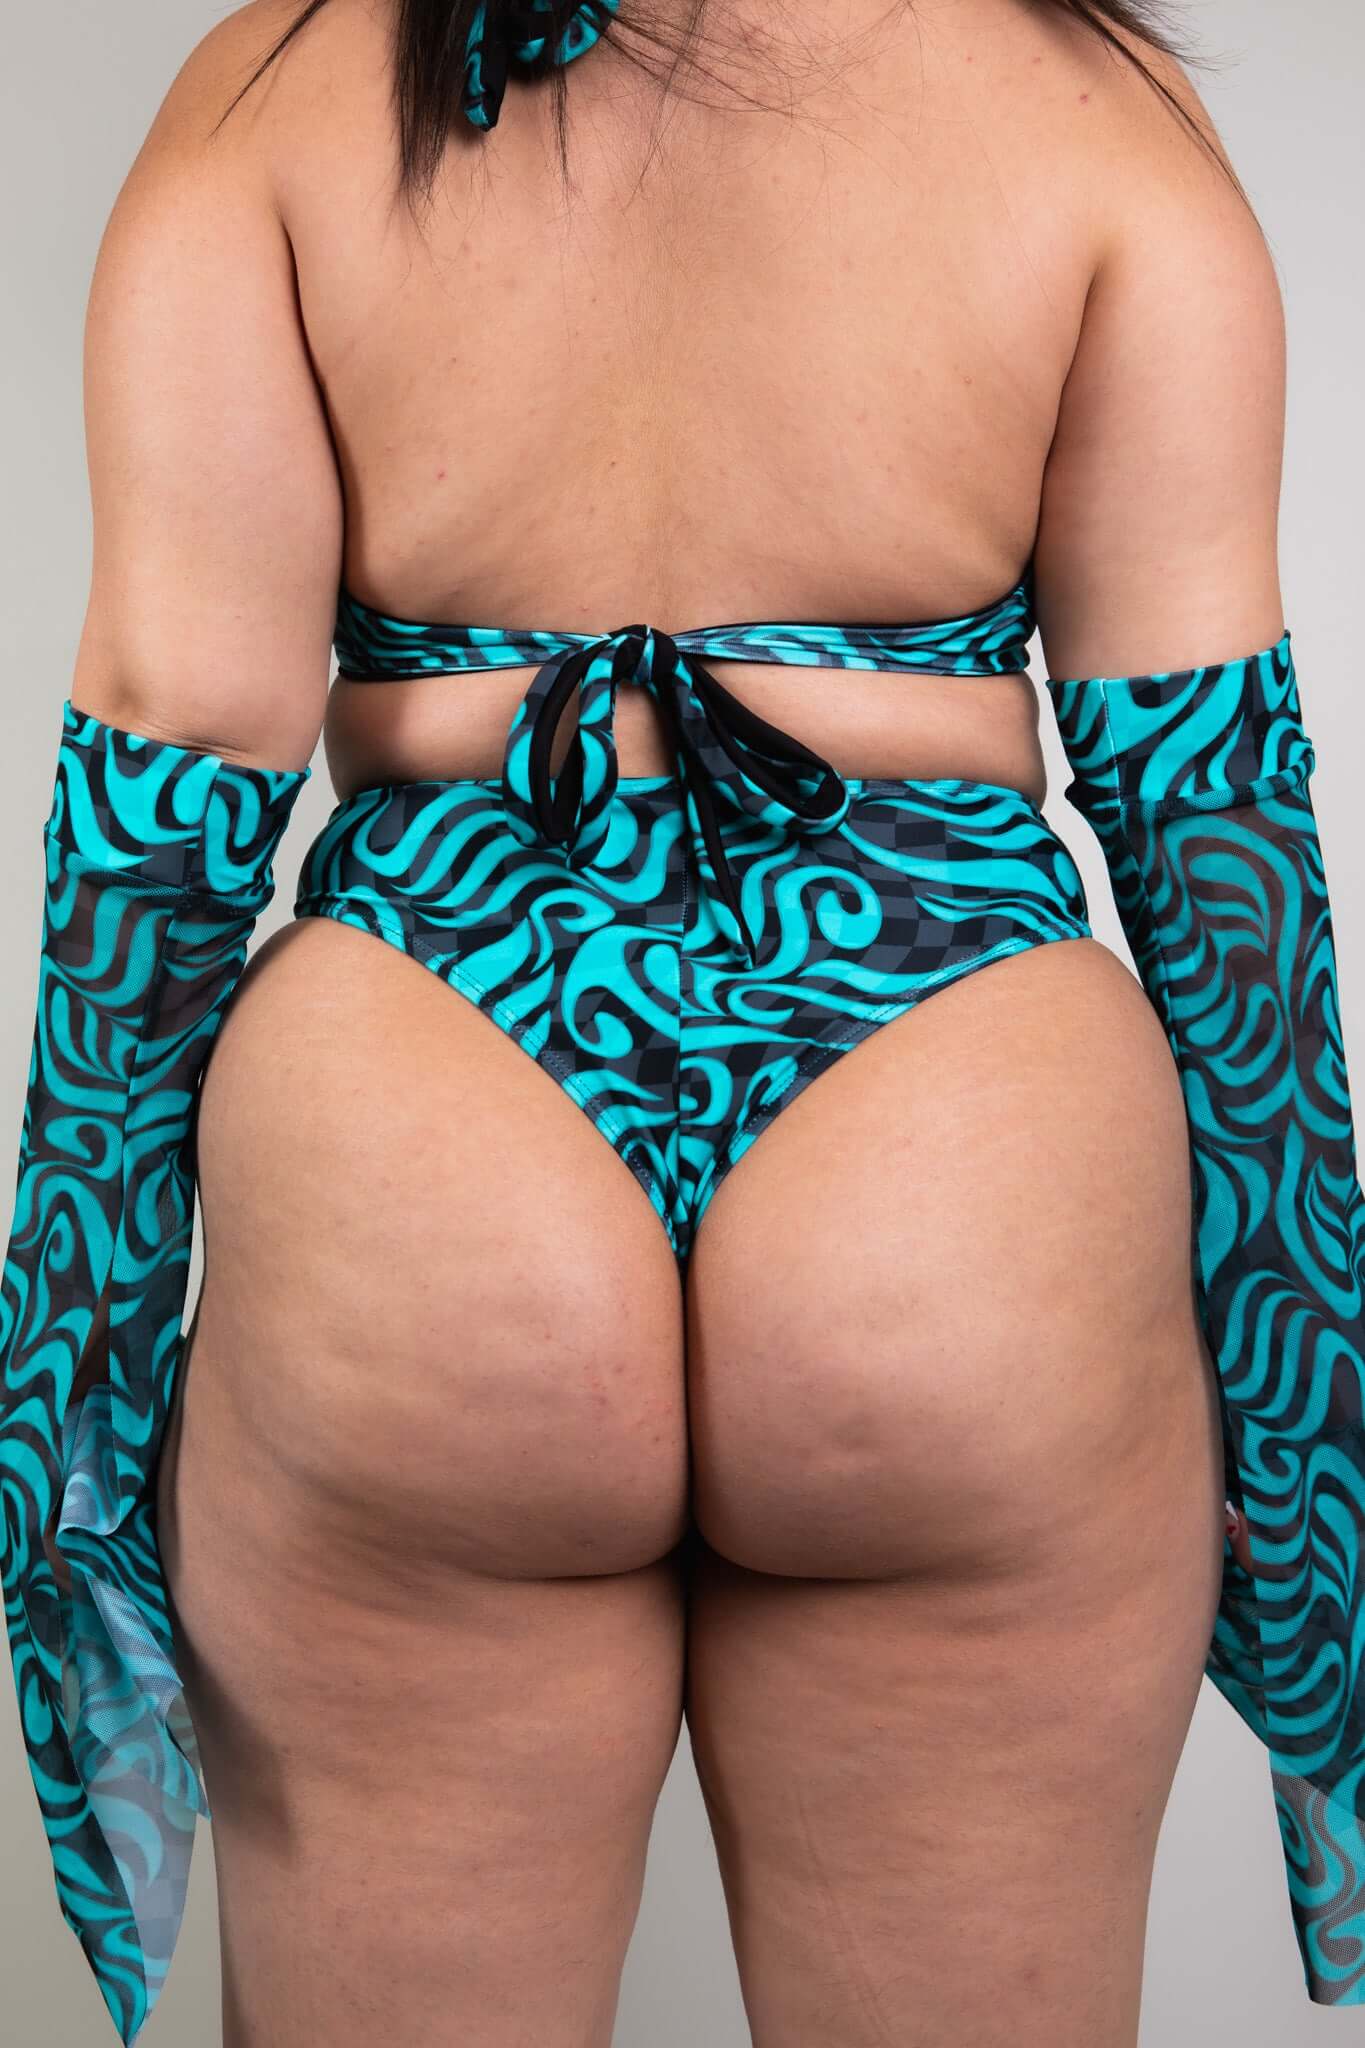 An up close photo of a woman wearing blue and black swirled bikini bottoms and a matching crop top. She is facing away from the camera.